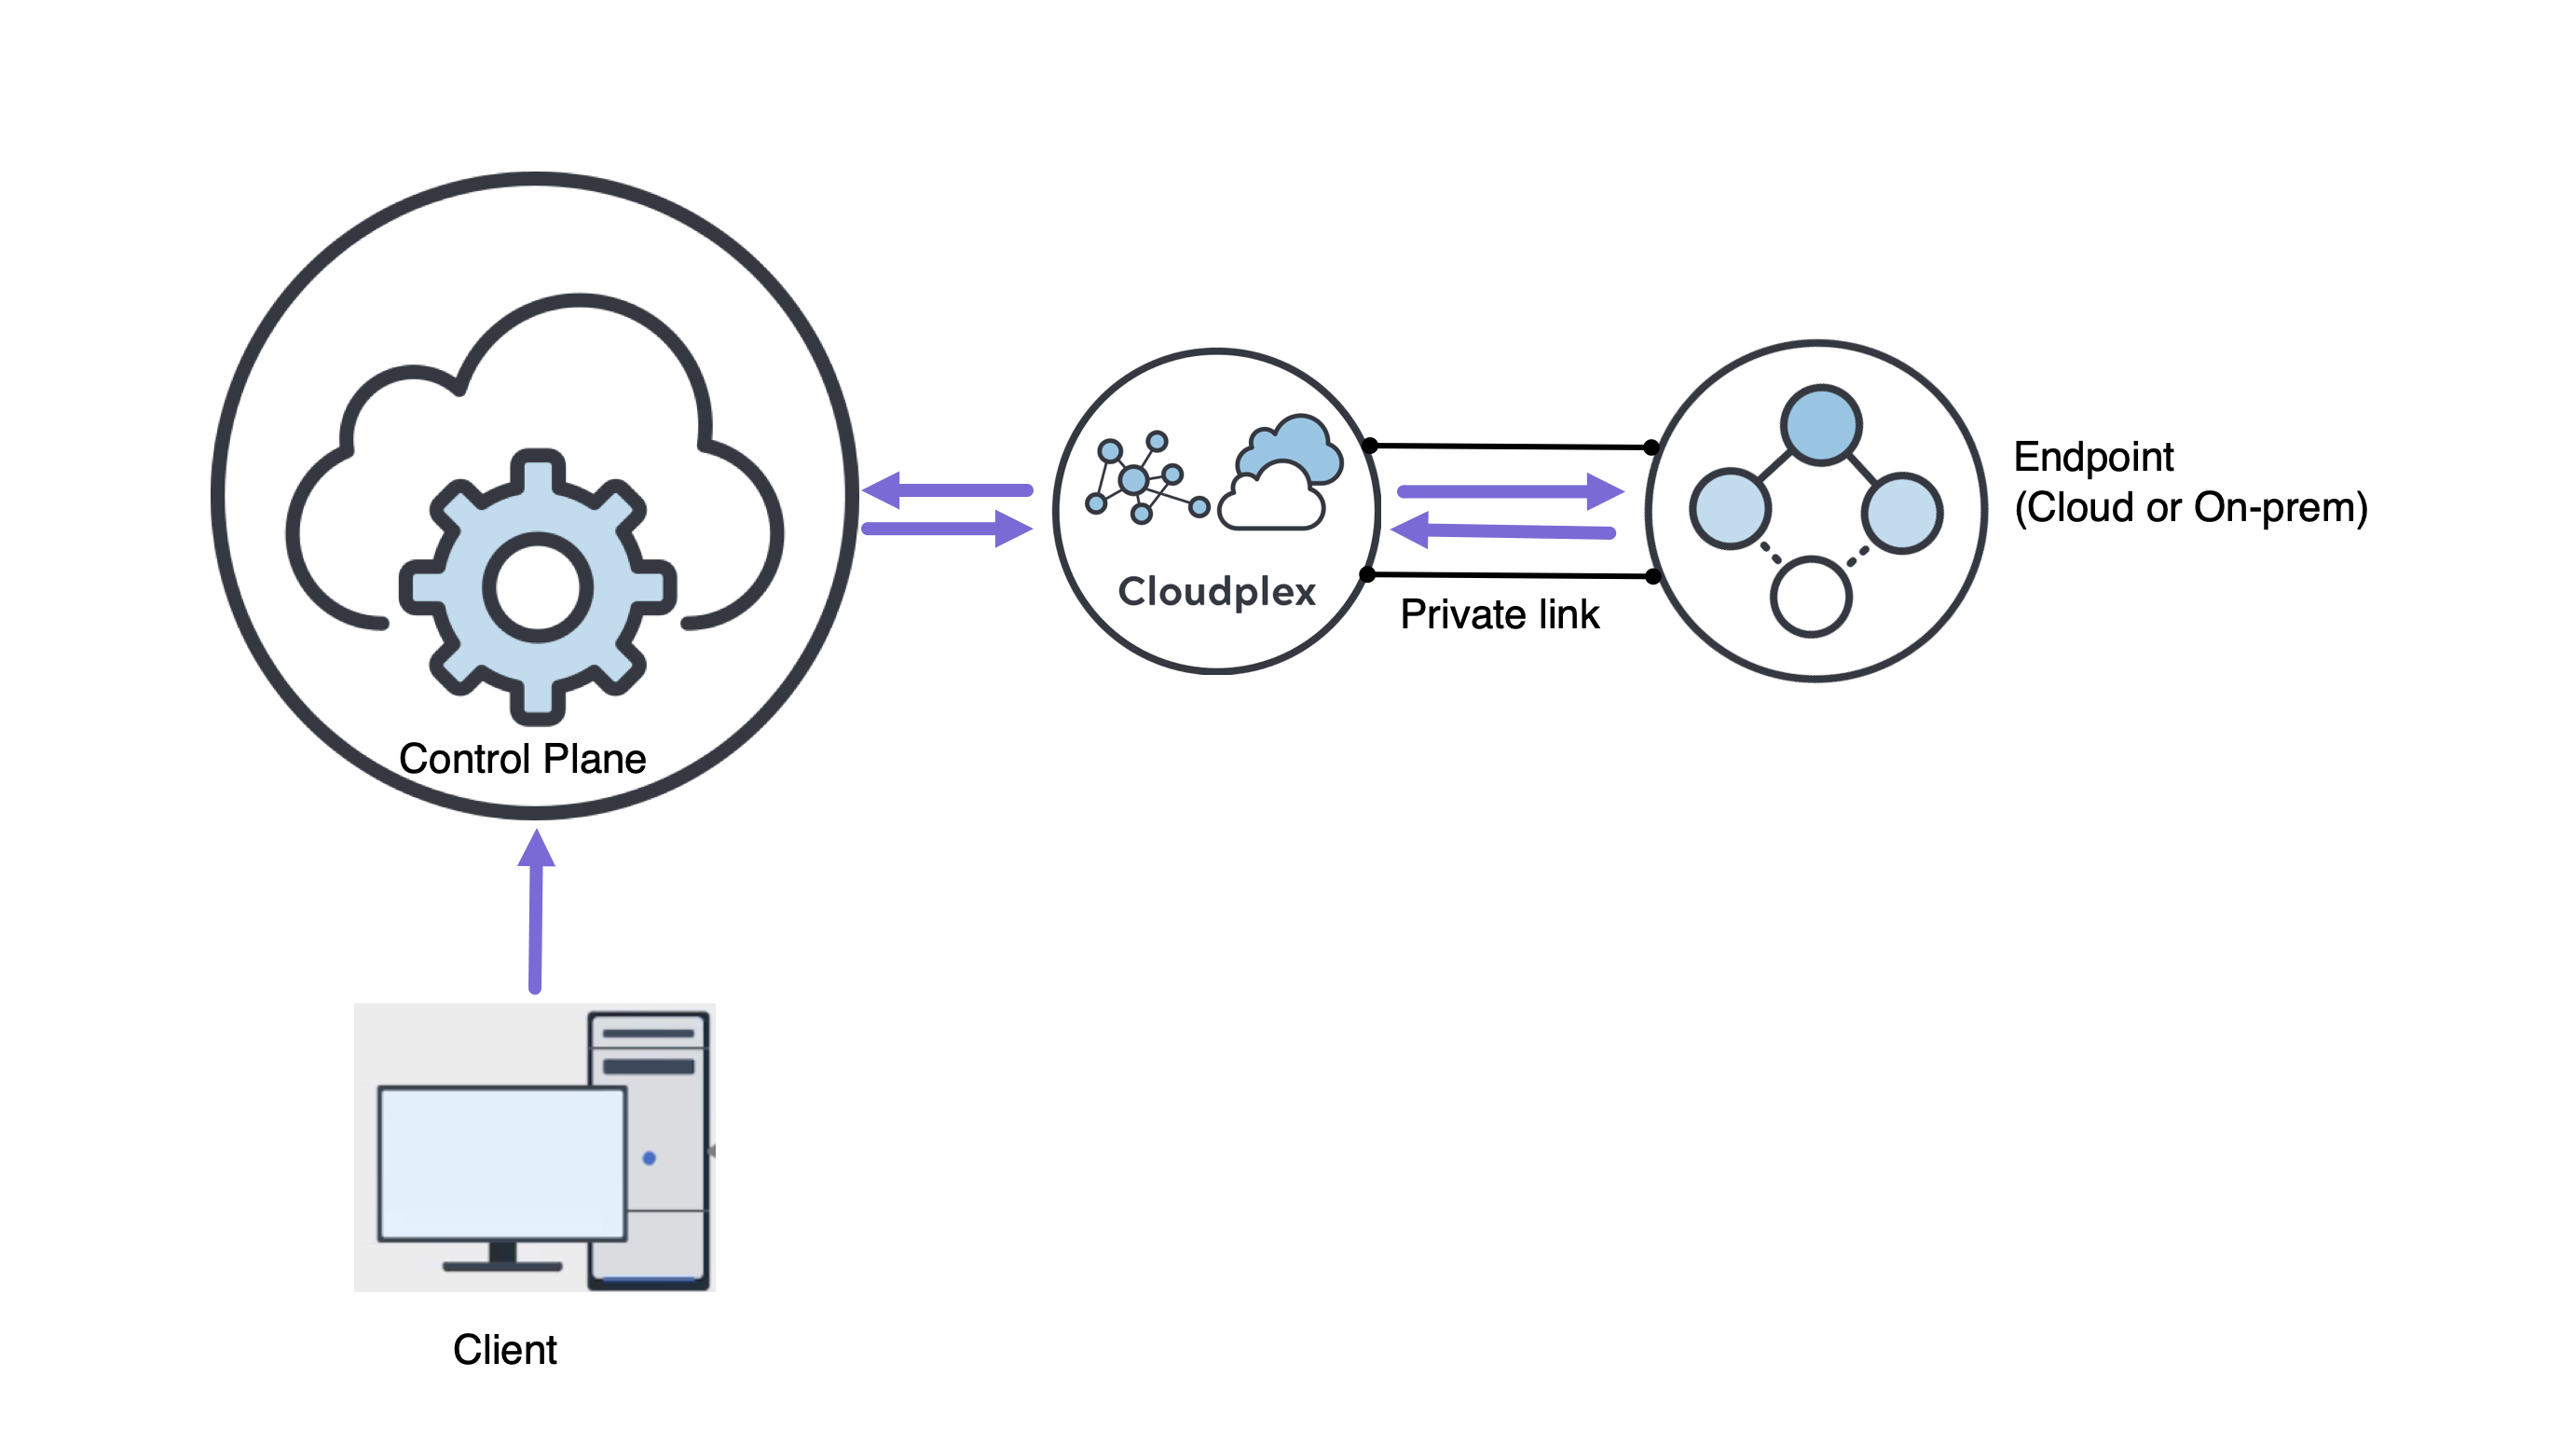 This diagram shows the client contacting the Control Plane, communicating with the Cloudplex, which communicates with an endpoint over a private link.